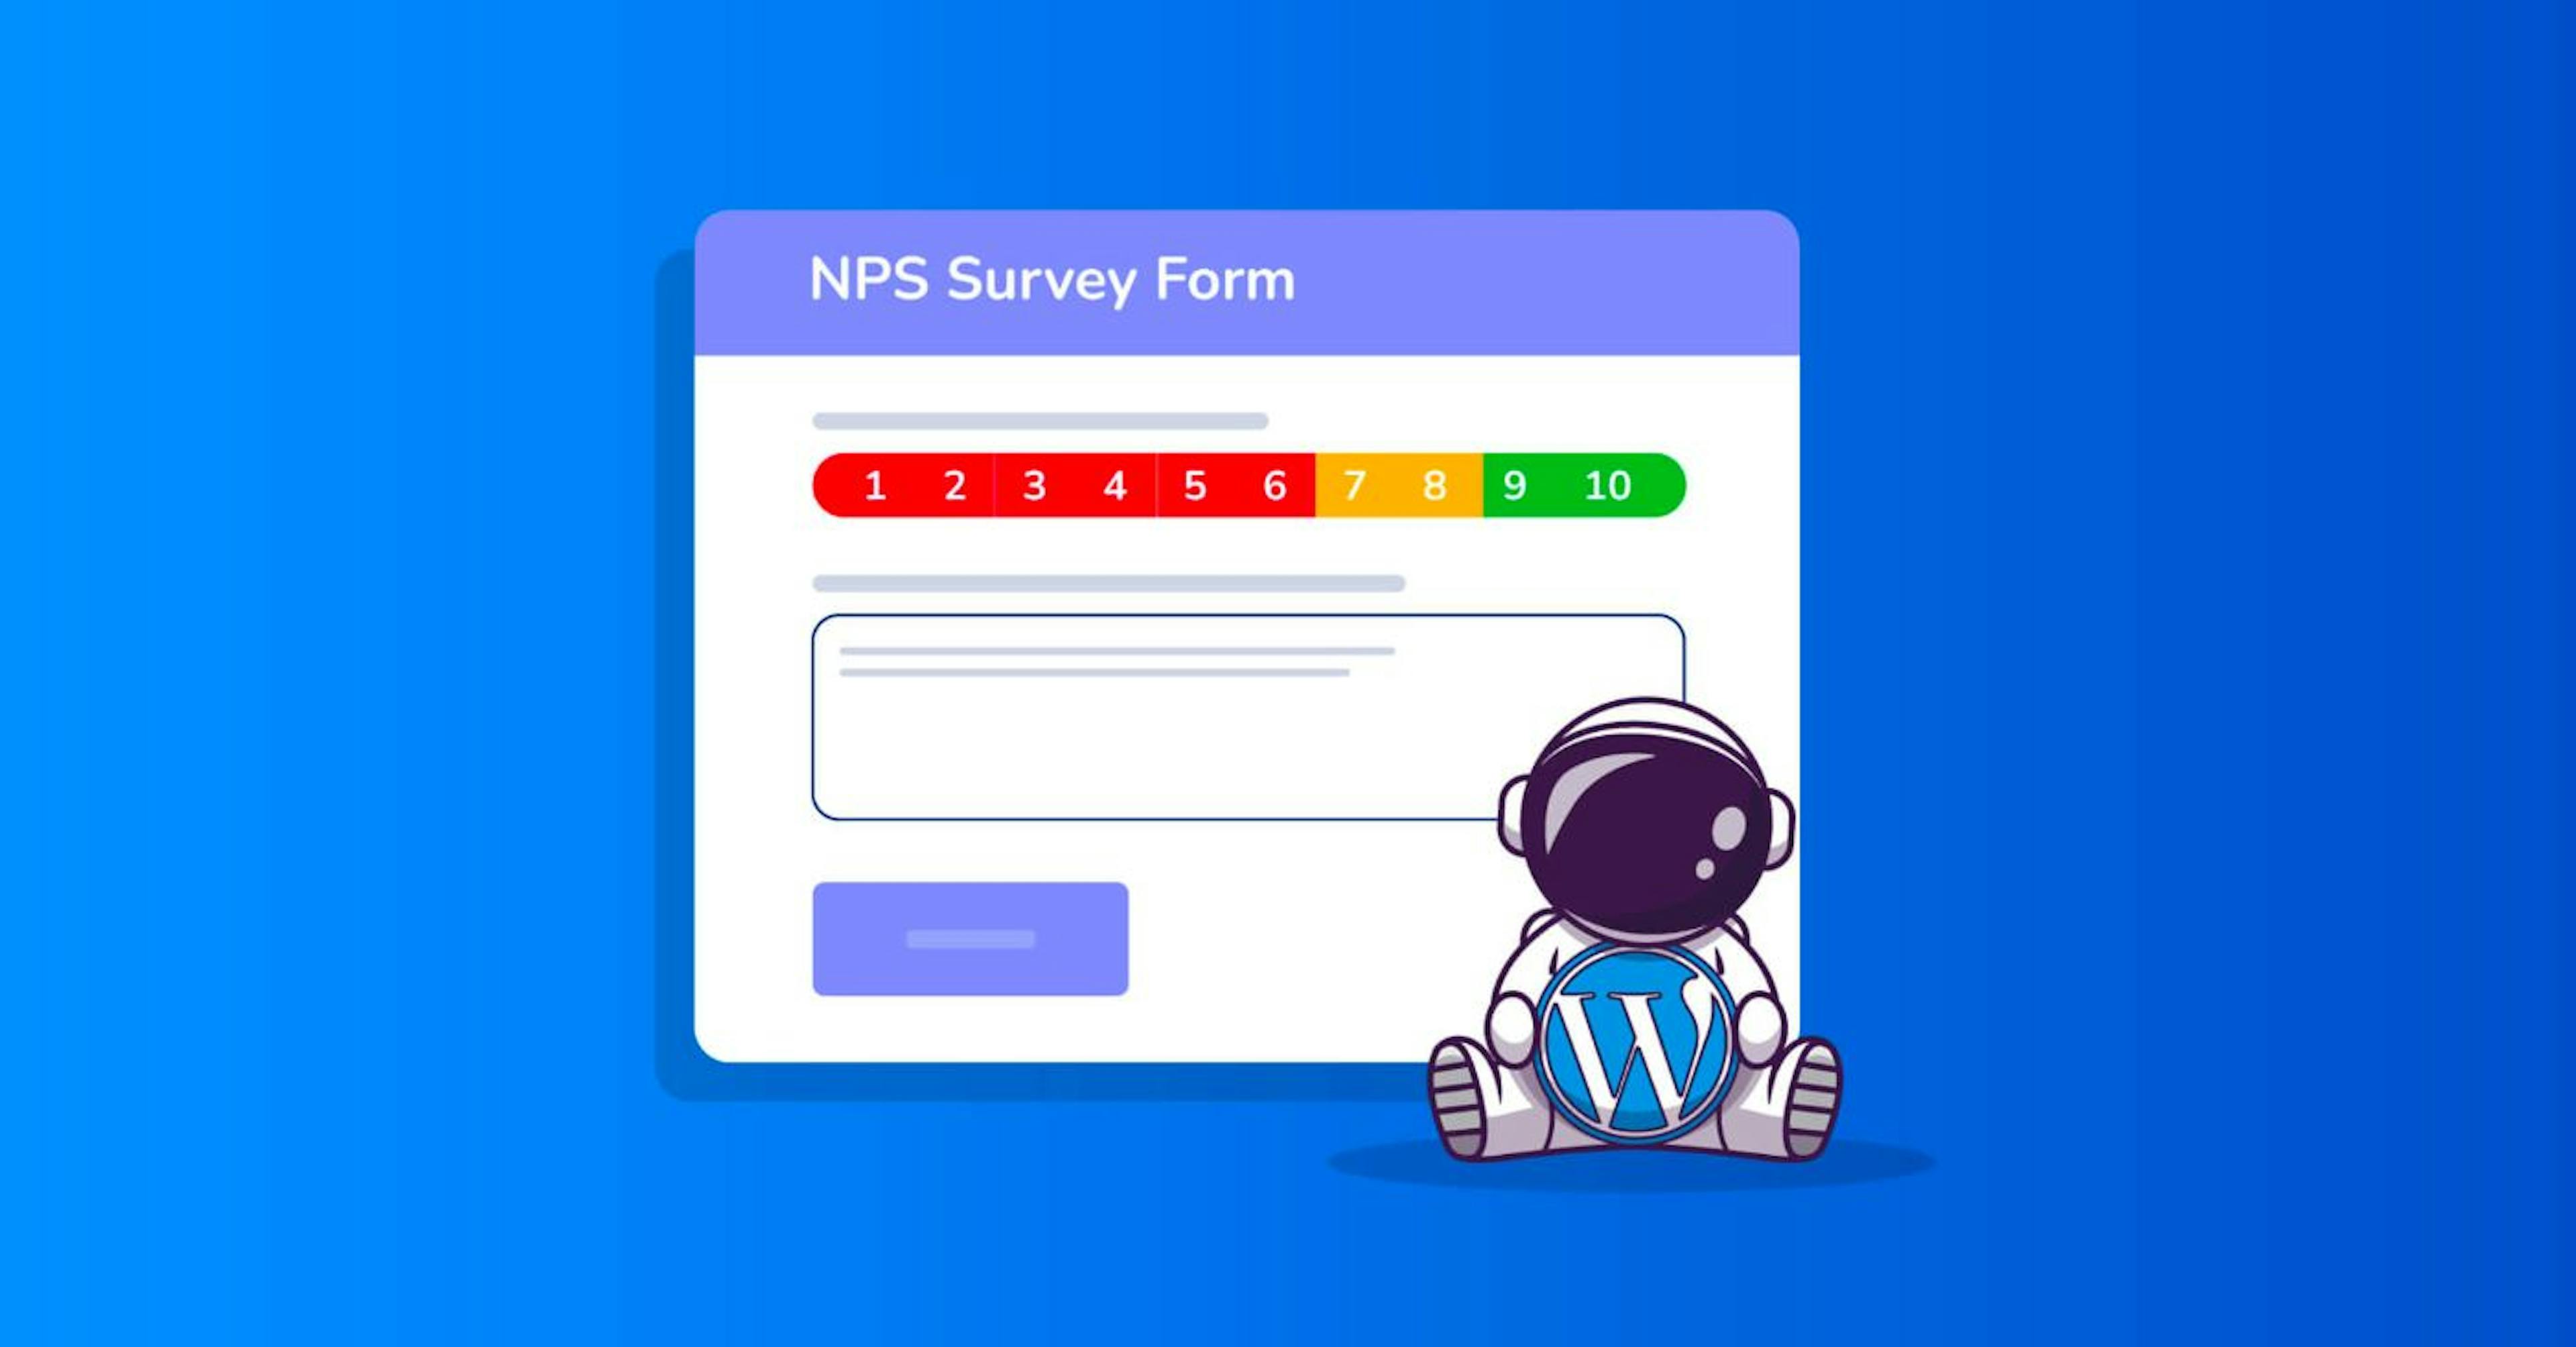 The NPS form may look like this, with a rating from 0 to 10 and a text field for comments or feedback.